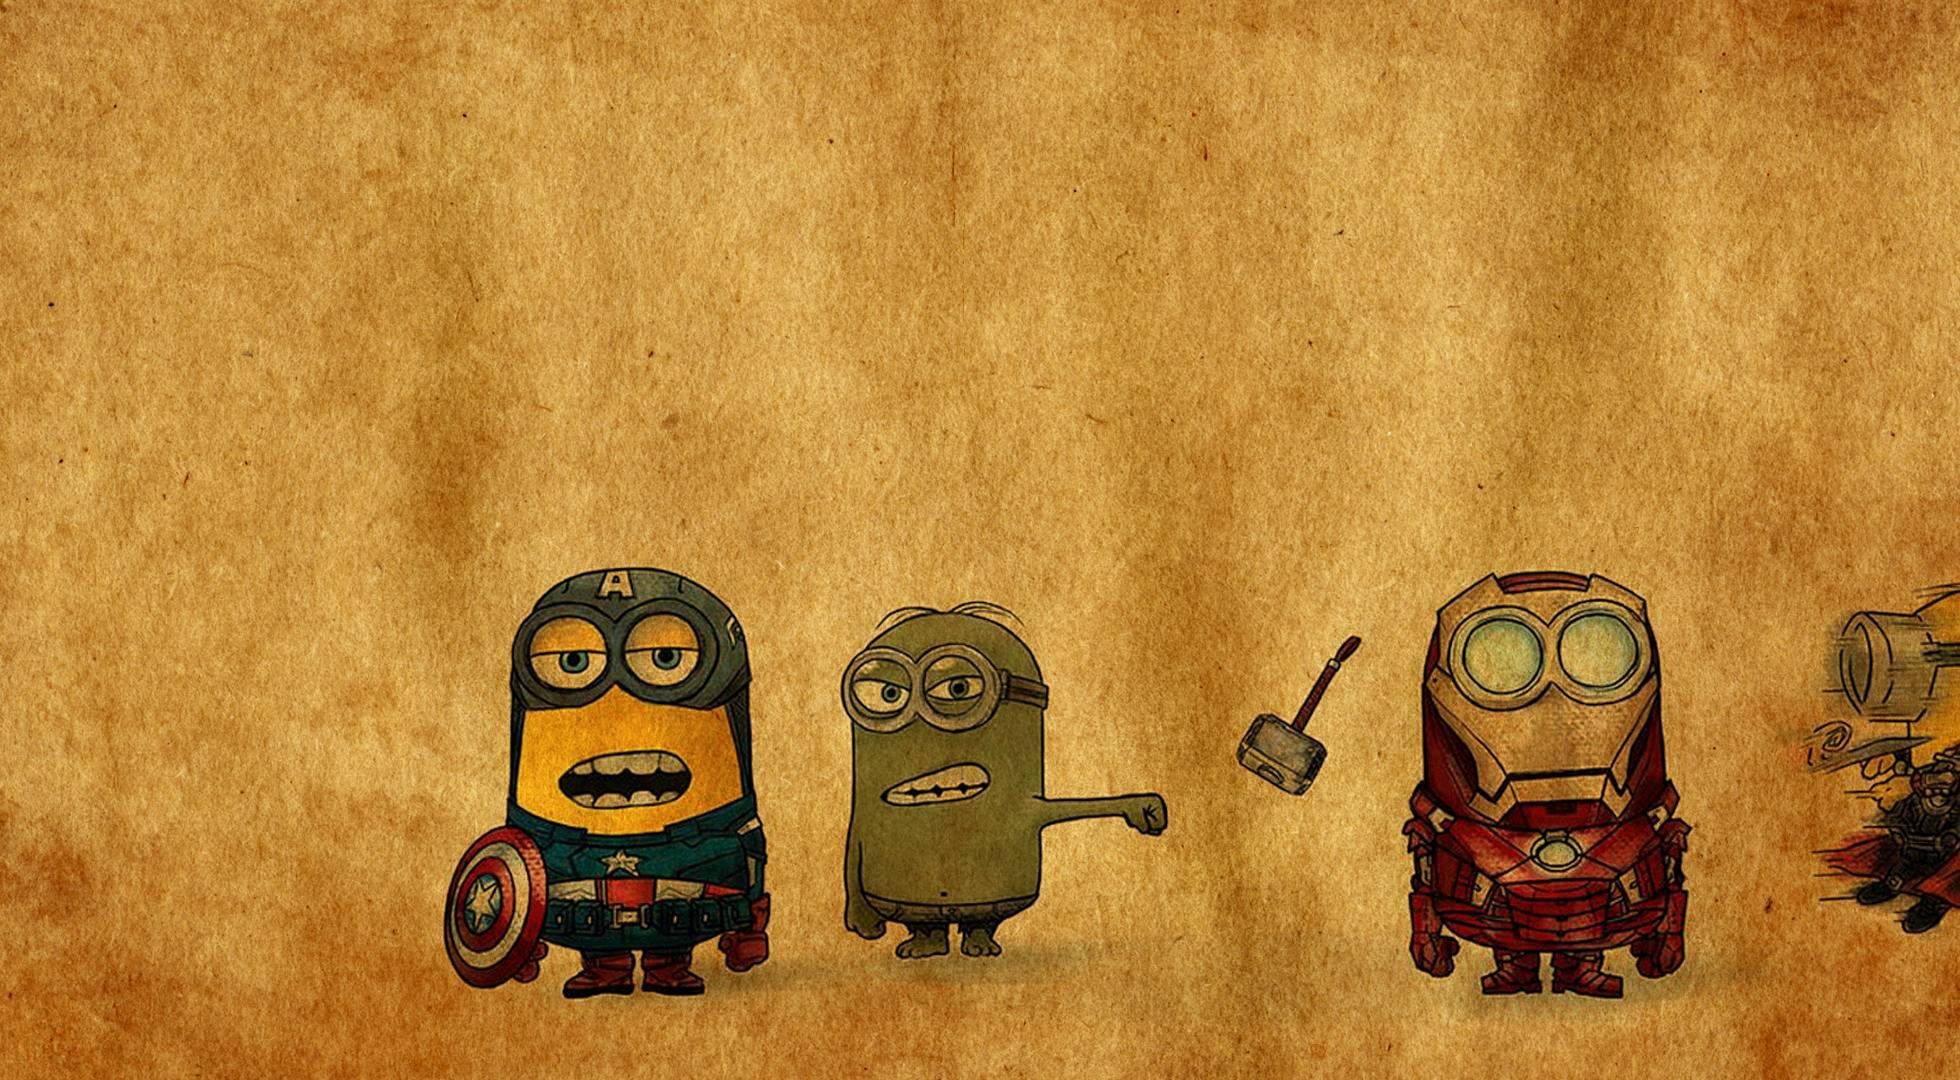 minions superheroes hd wallpapers wallpapers55com   Best Wallpapers